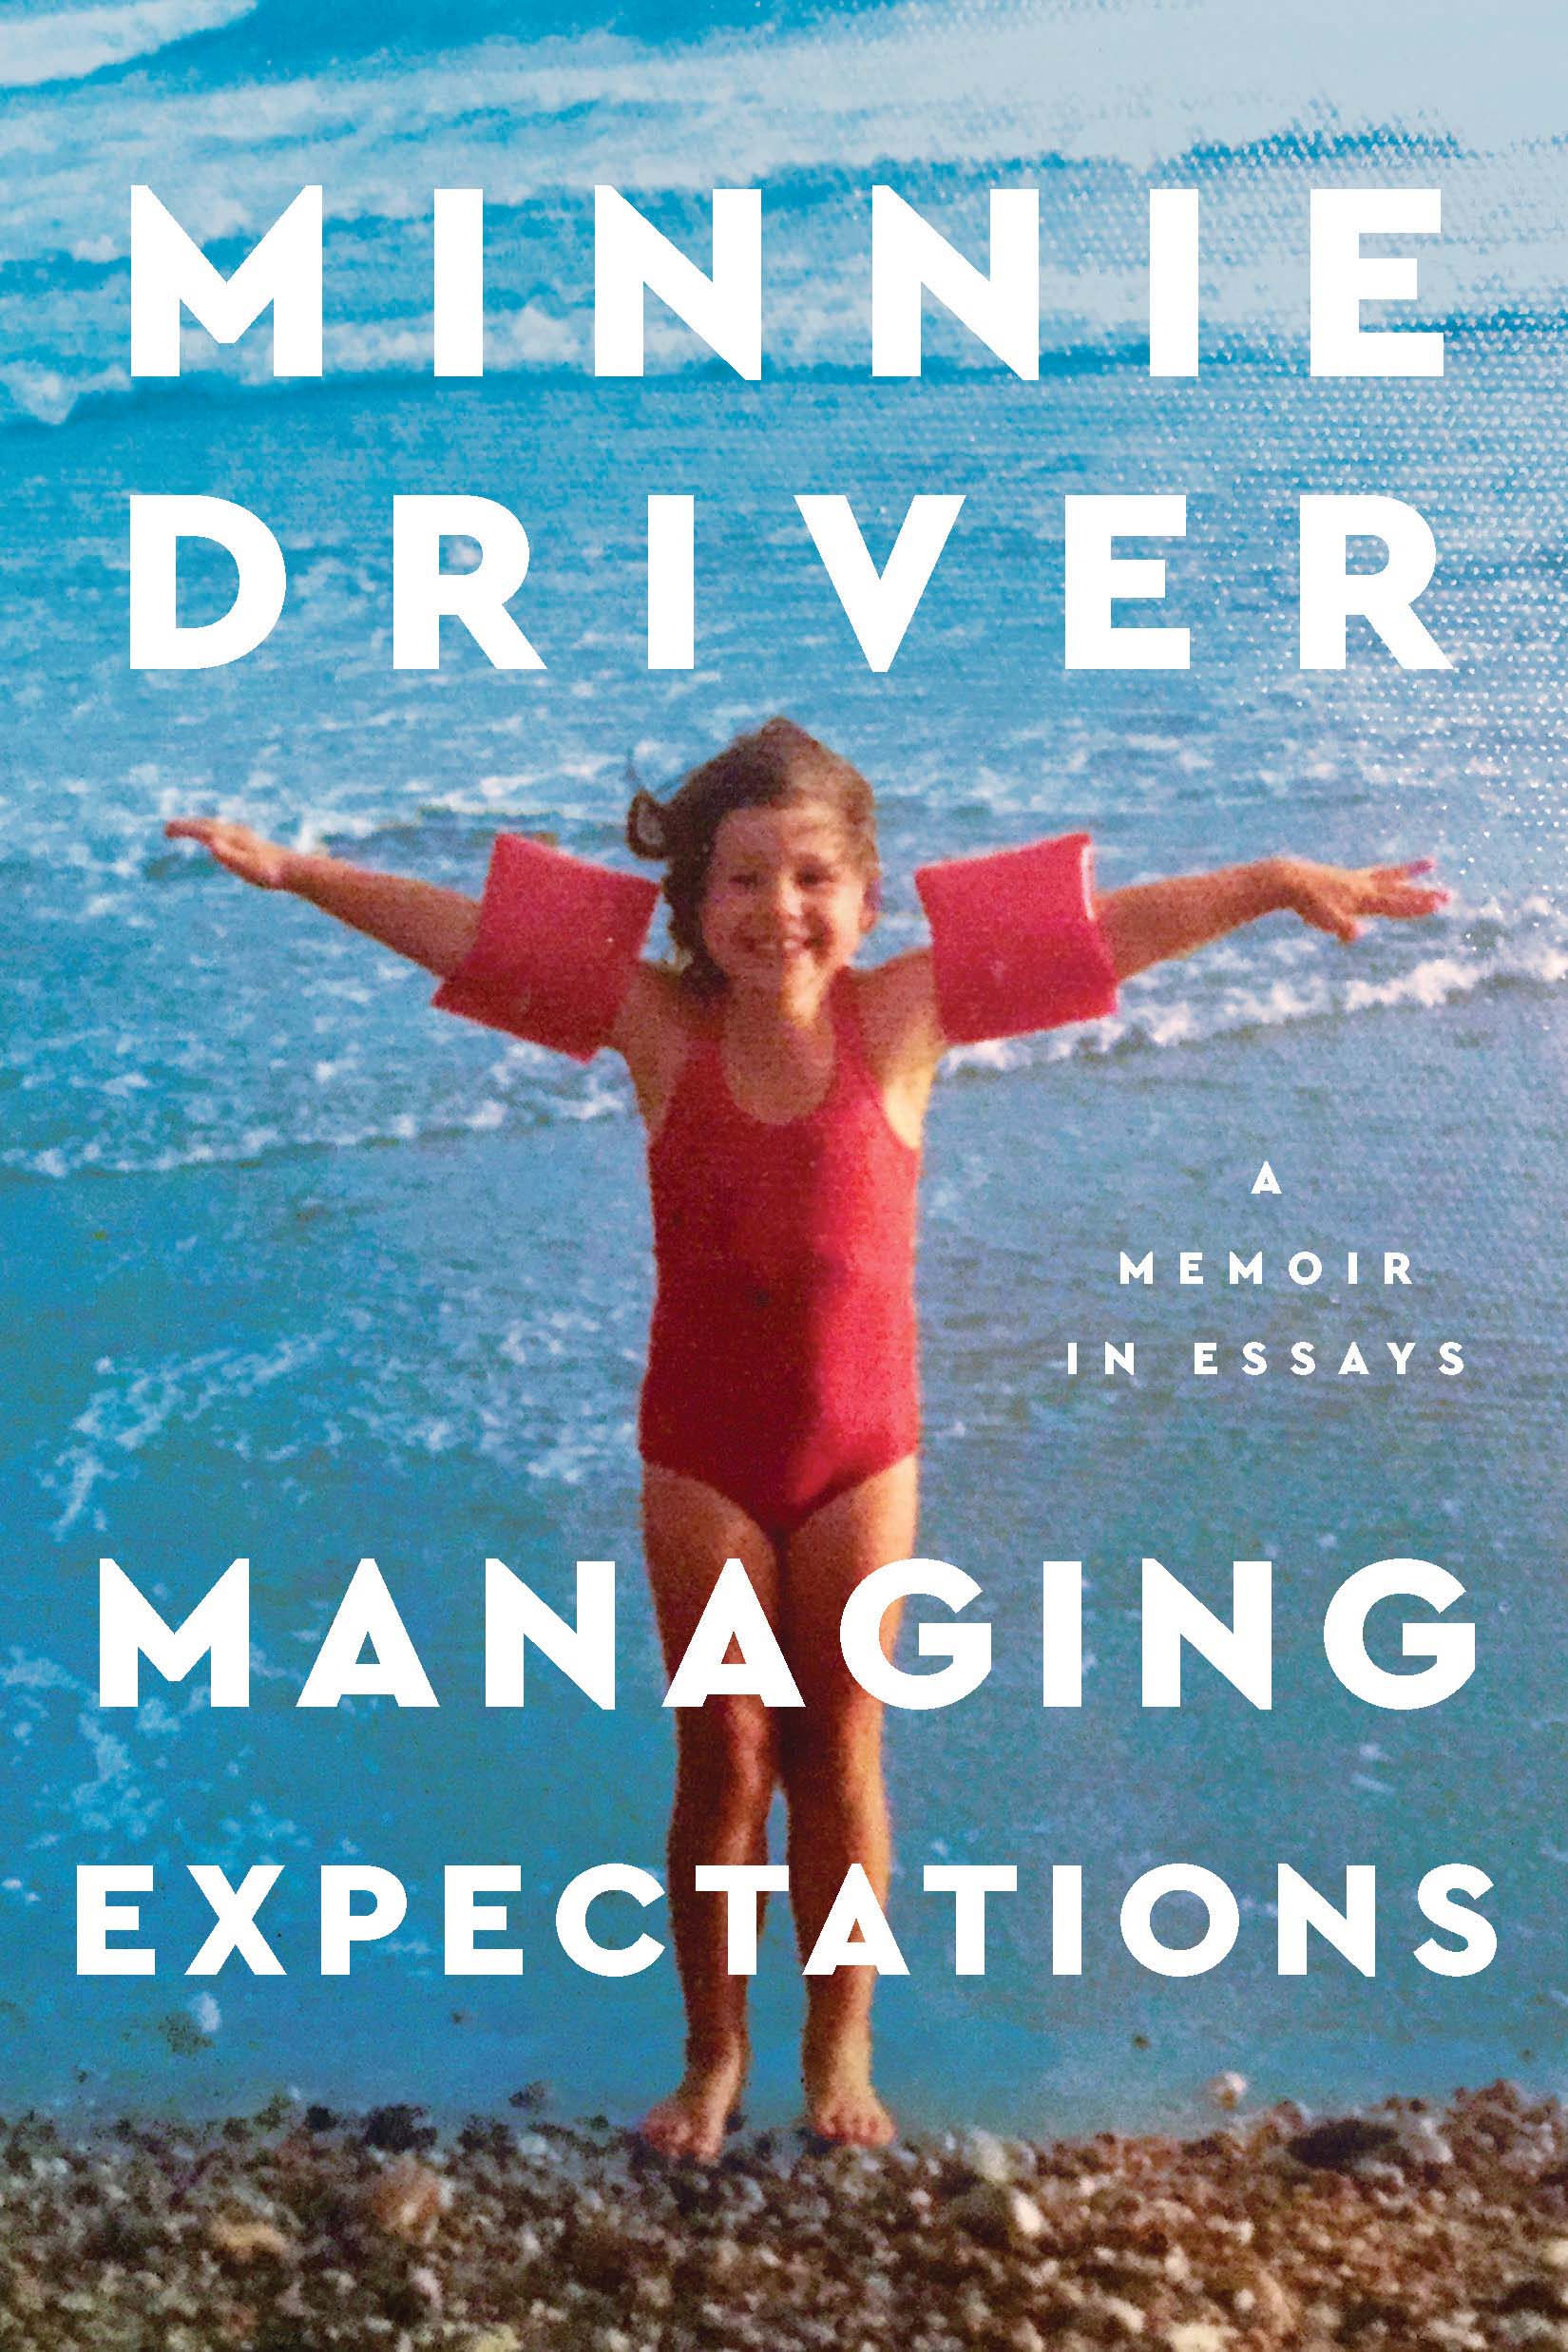 Managing Expectations by Minnie Driver